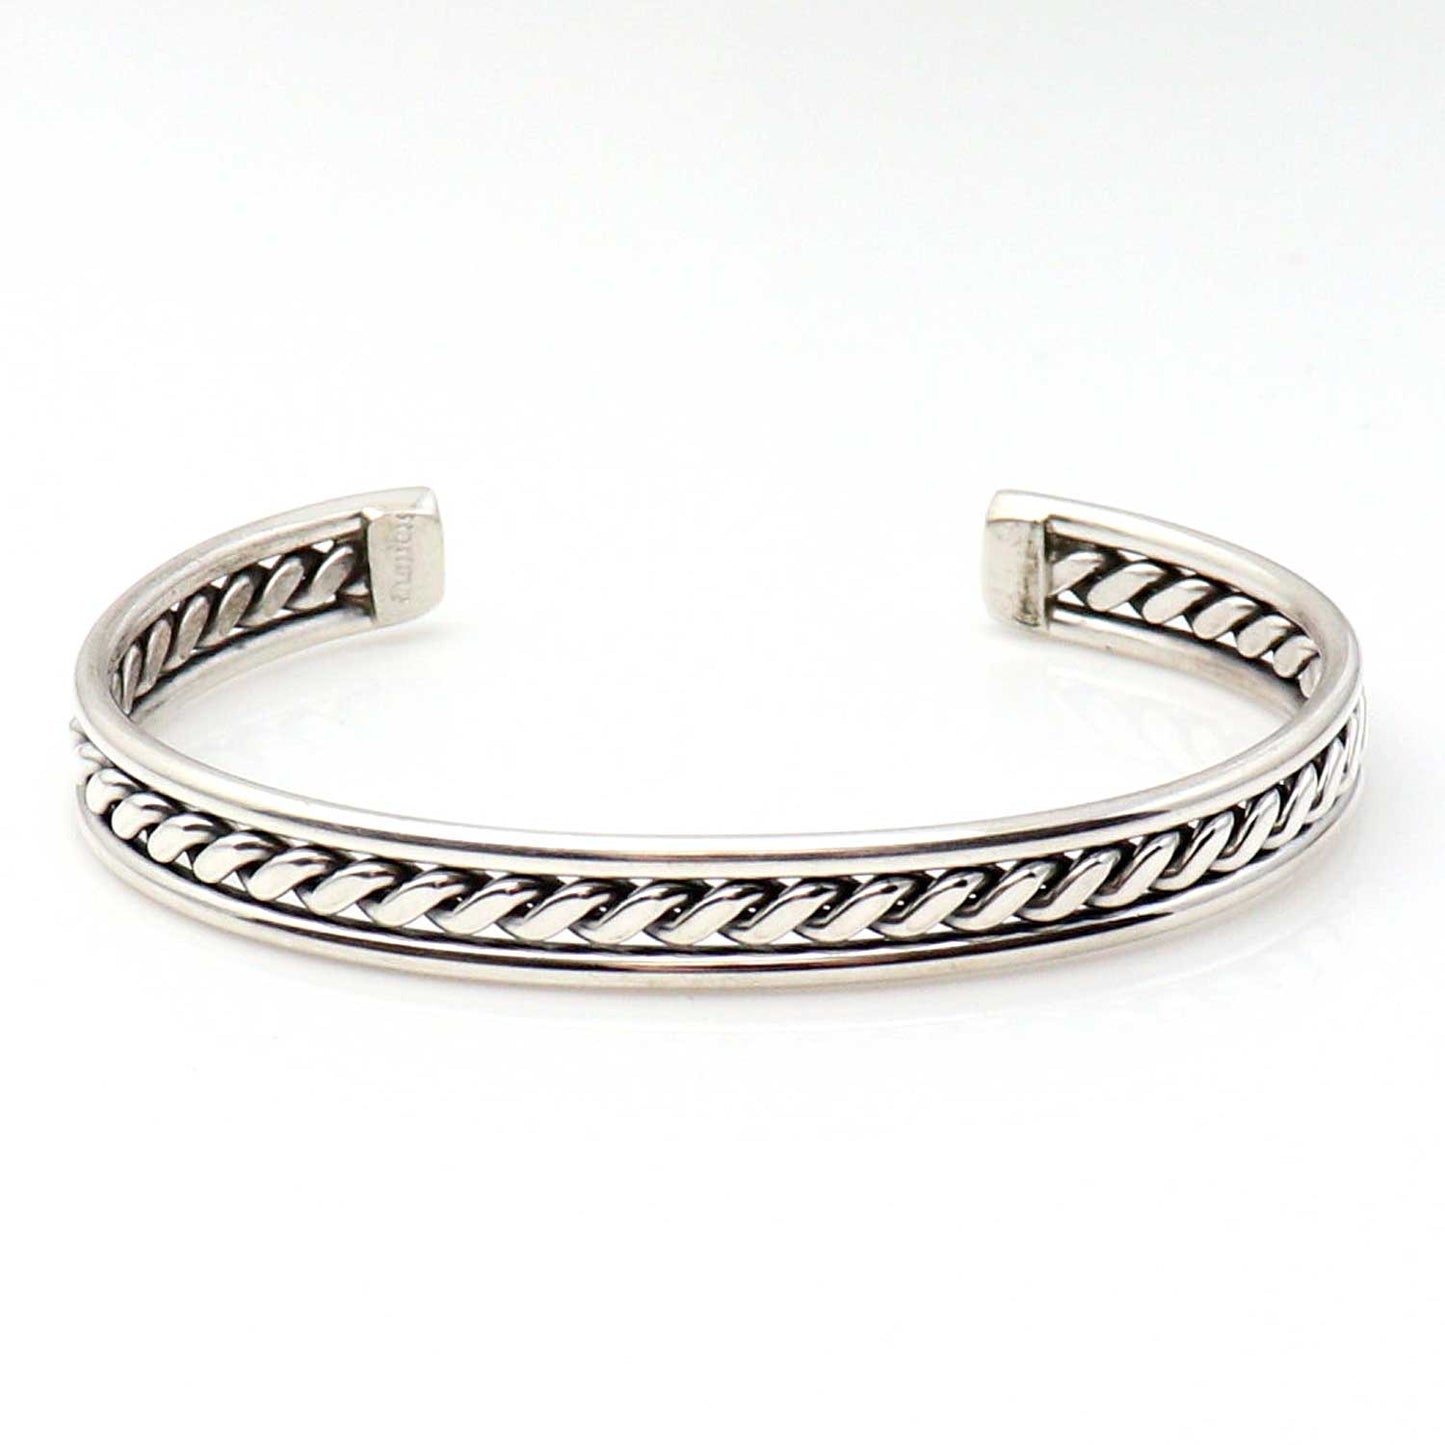 Load image into Gallery viewer, Sterling Silver Bracelet by Elaine Tahe
